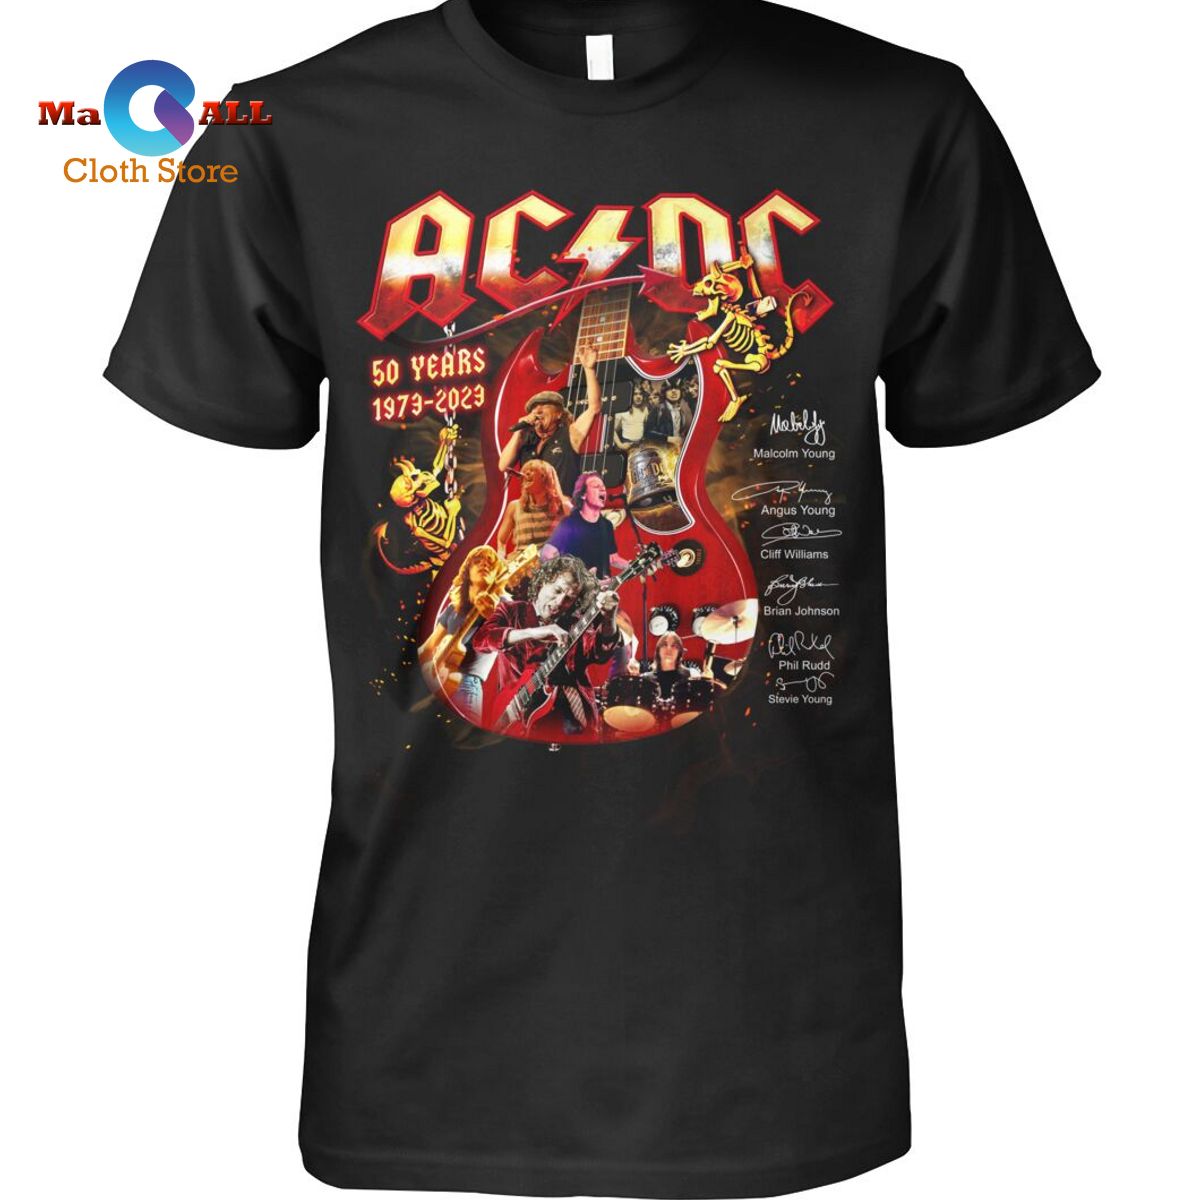 NEW] ACDC 50 Years 1973-2023 T-Shirt Macall Cloth Store - Destination for fashionistas